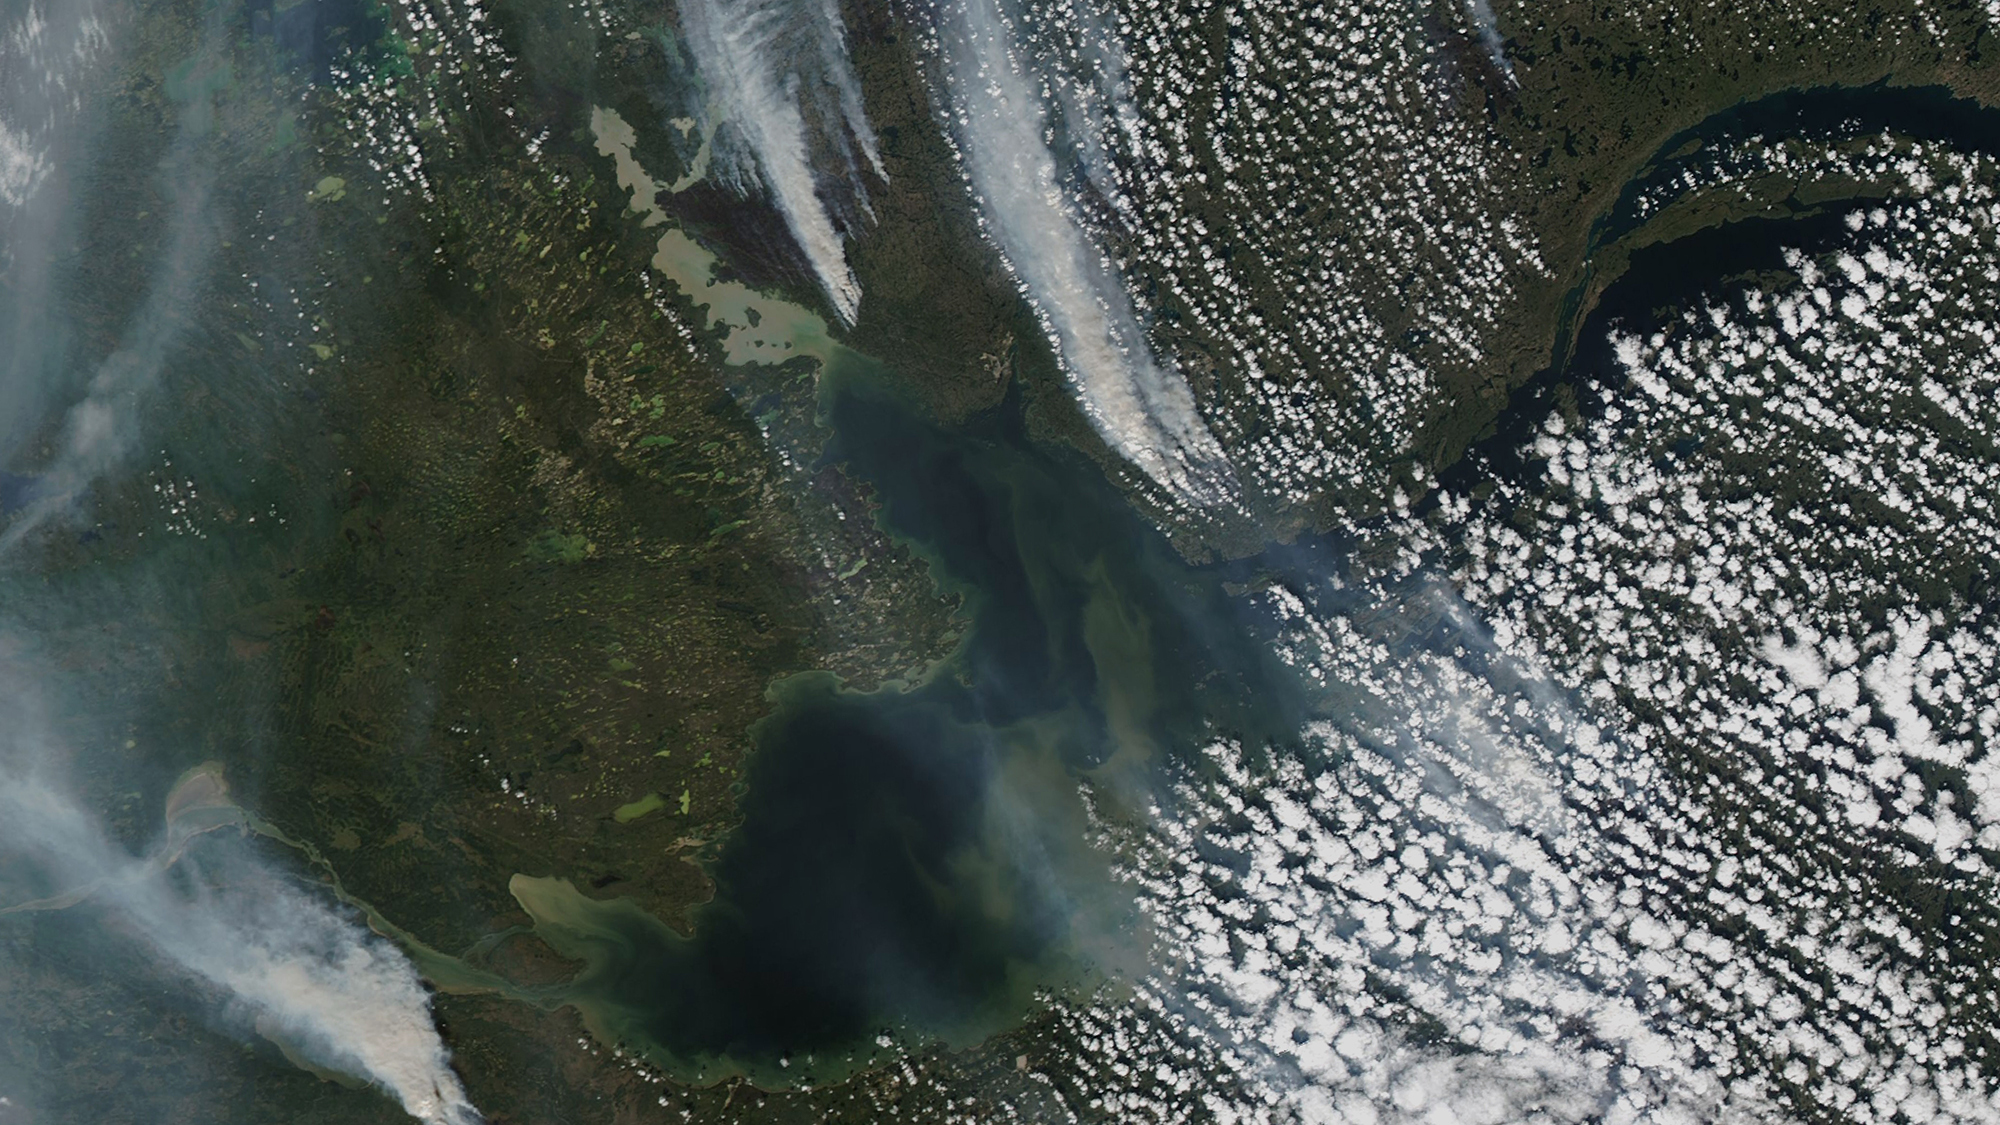 Wildfire smoke drifts over western Canada, as seen from a satellite. On August 8, 2023, the Moderate Resolution Imaging Spectroradiometer on NASA’s Aqua satellite captured this image of dense plumes of smoke streaming from dozens of large fires in the Northwest Territories. Several of these fires raged around Yellowknife, the province’s capital and largest city. These fires follow major outbreaks of fire in Alberta, British Columbia, Nova Scotia, and Quebec, in May, June, and July.